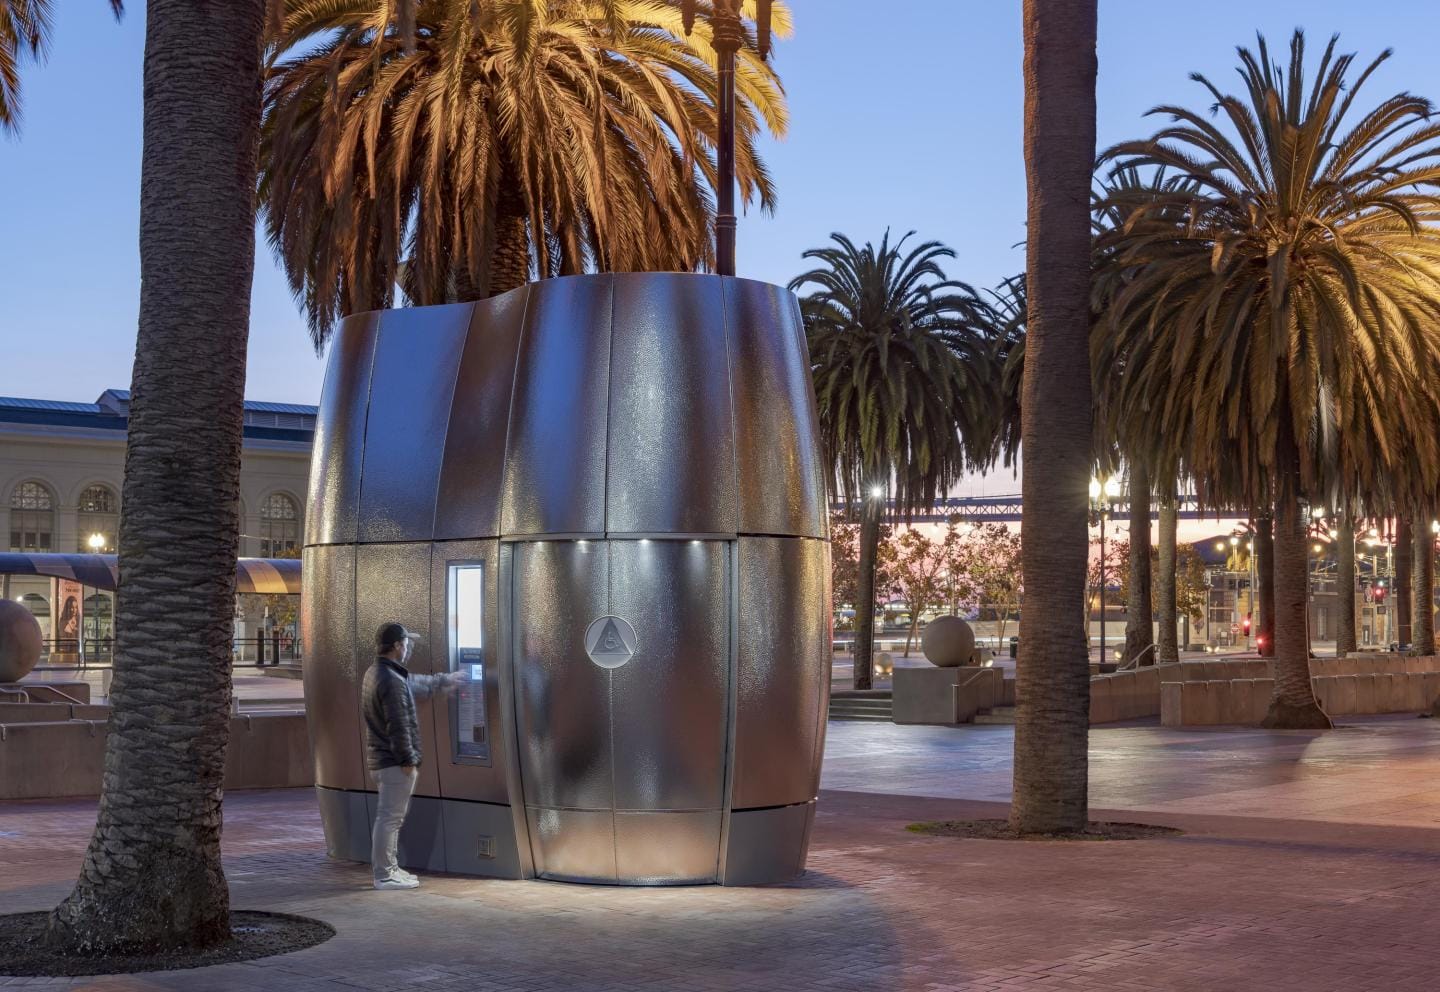 A person standing in front of a futuristic-looking silver public toilet kiosk nestled among palm trees in San Francisco's Embarcadero plaza